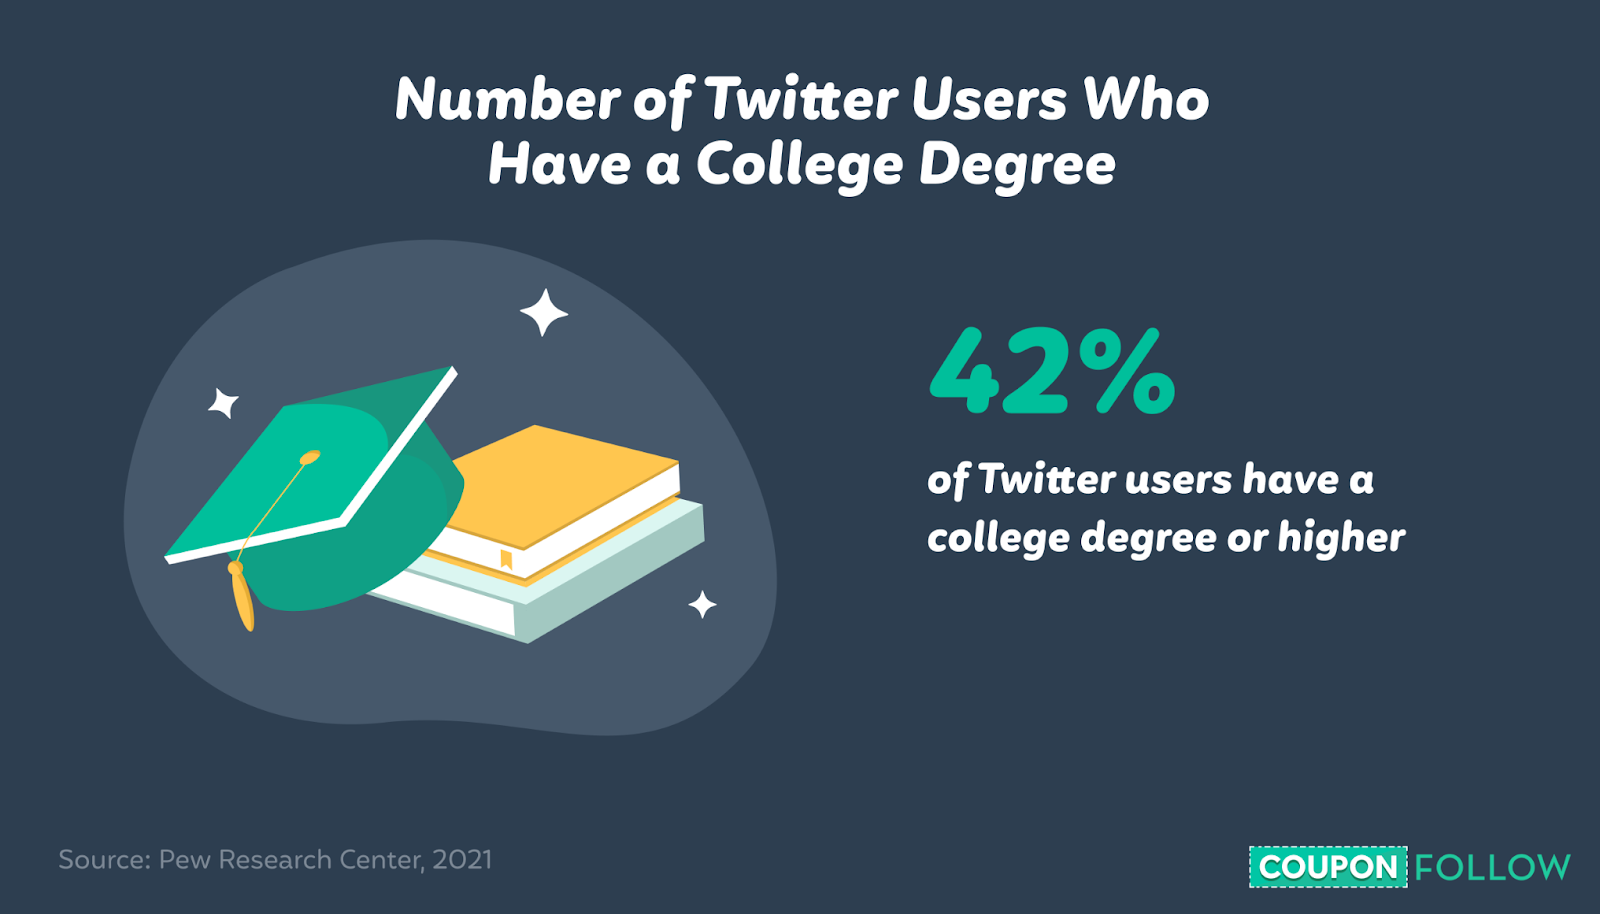 Image depicting the number of Twitter users who have a college degree